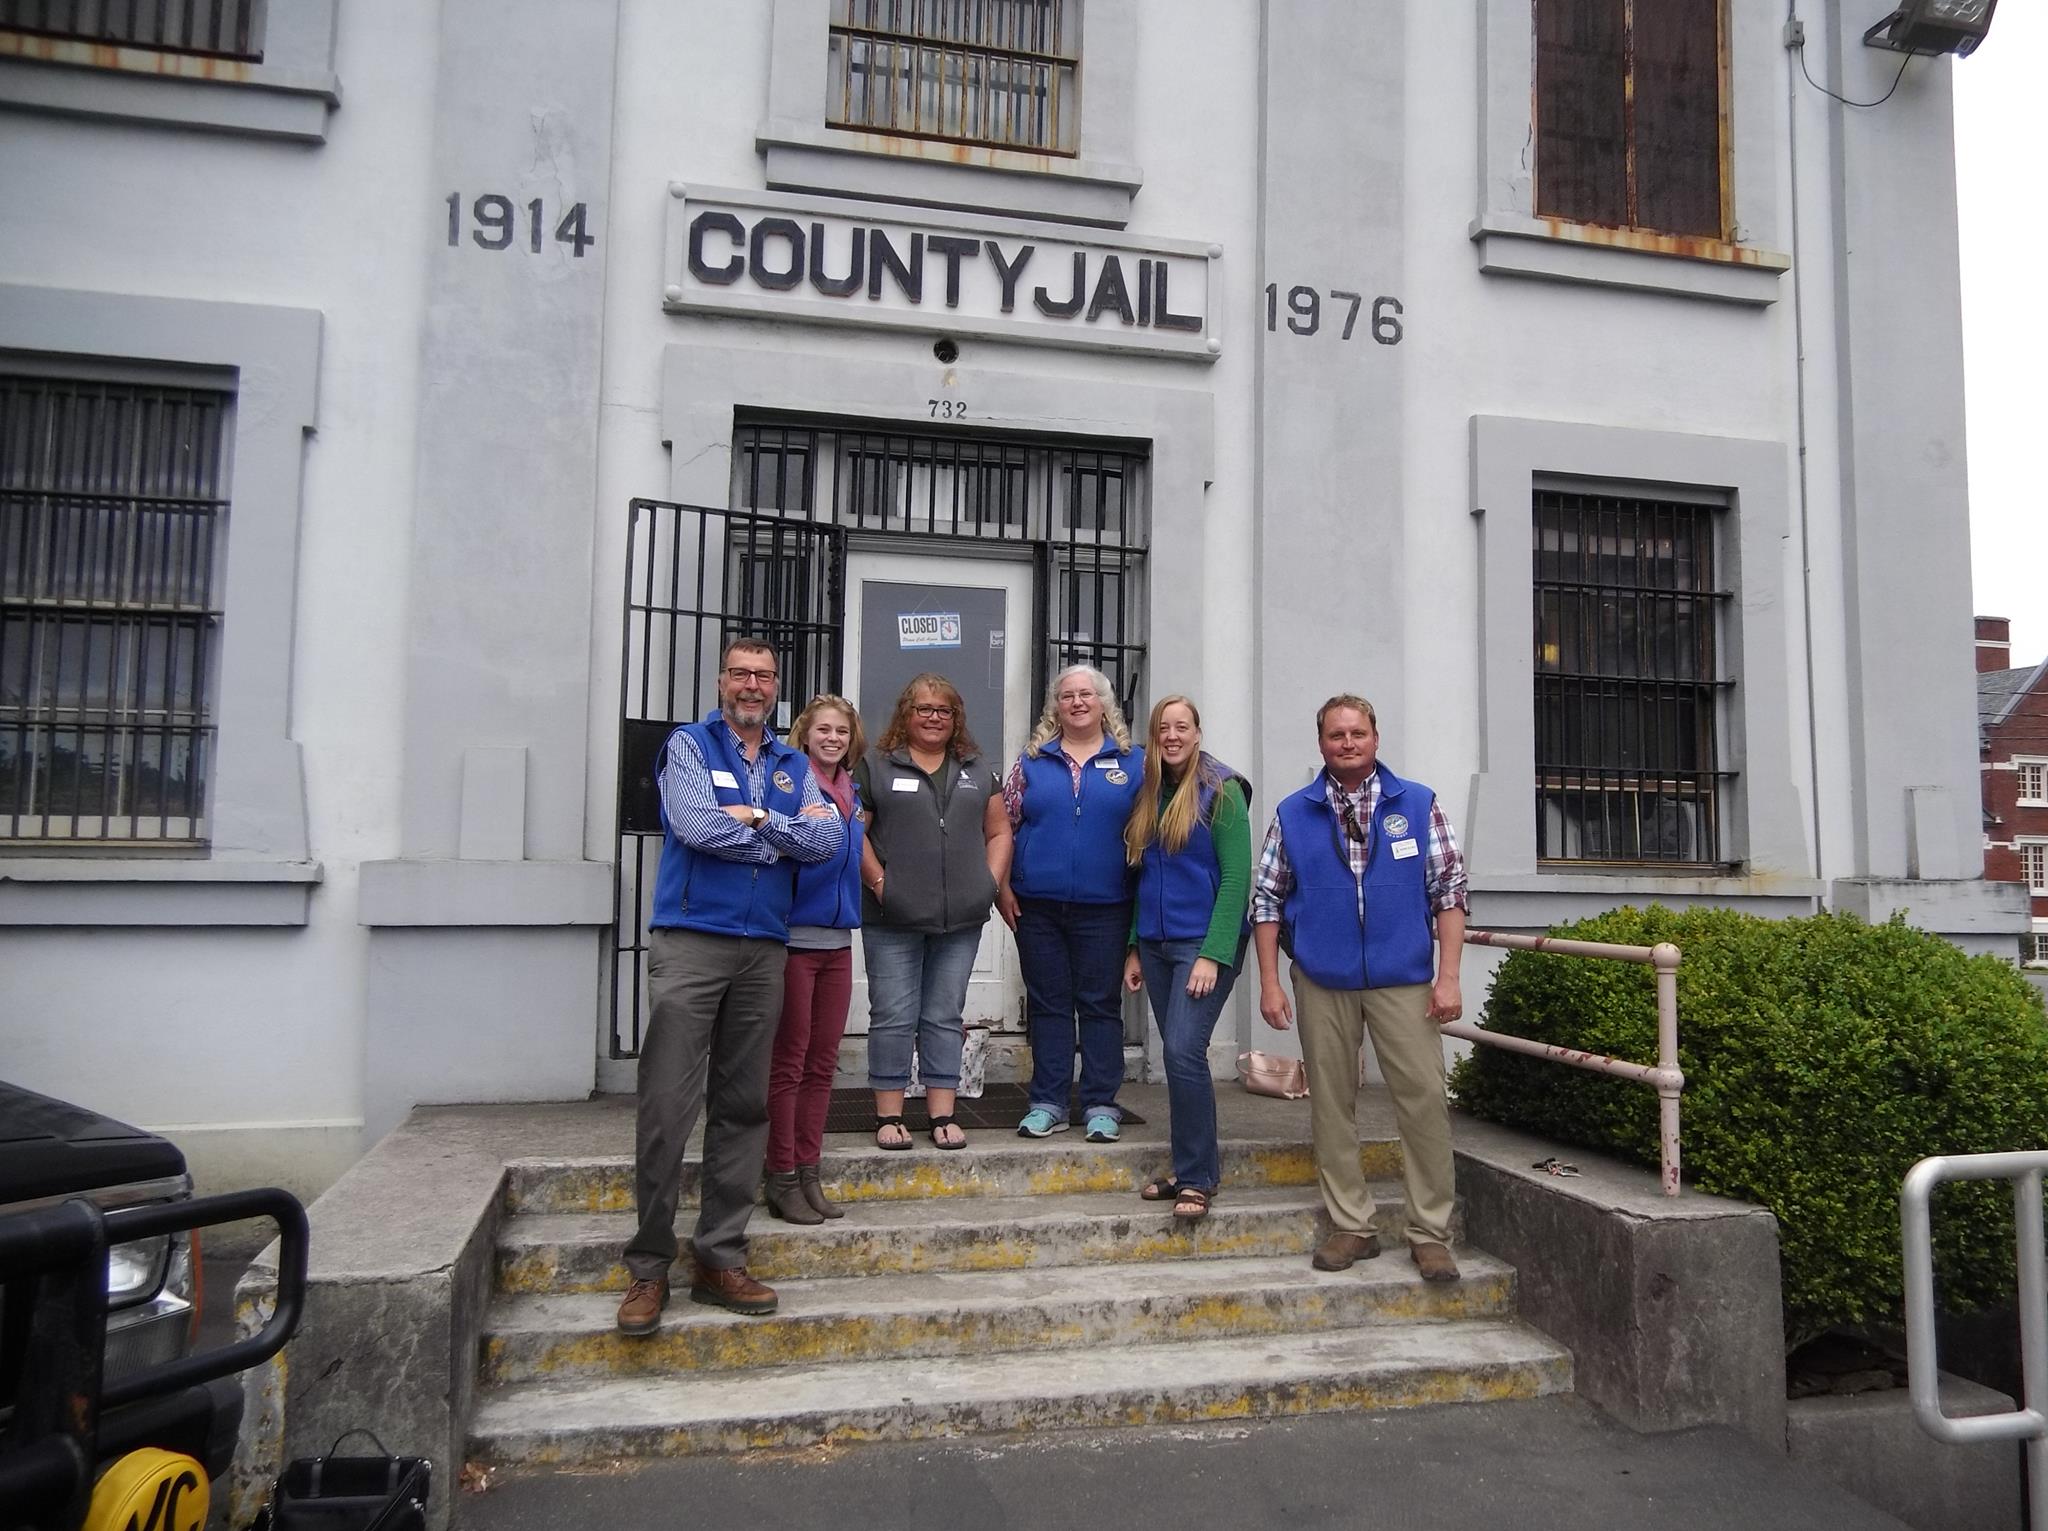 six people pose for photo in front of a historic county jail building that is now a museum